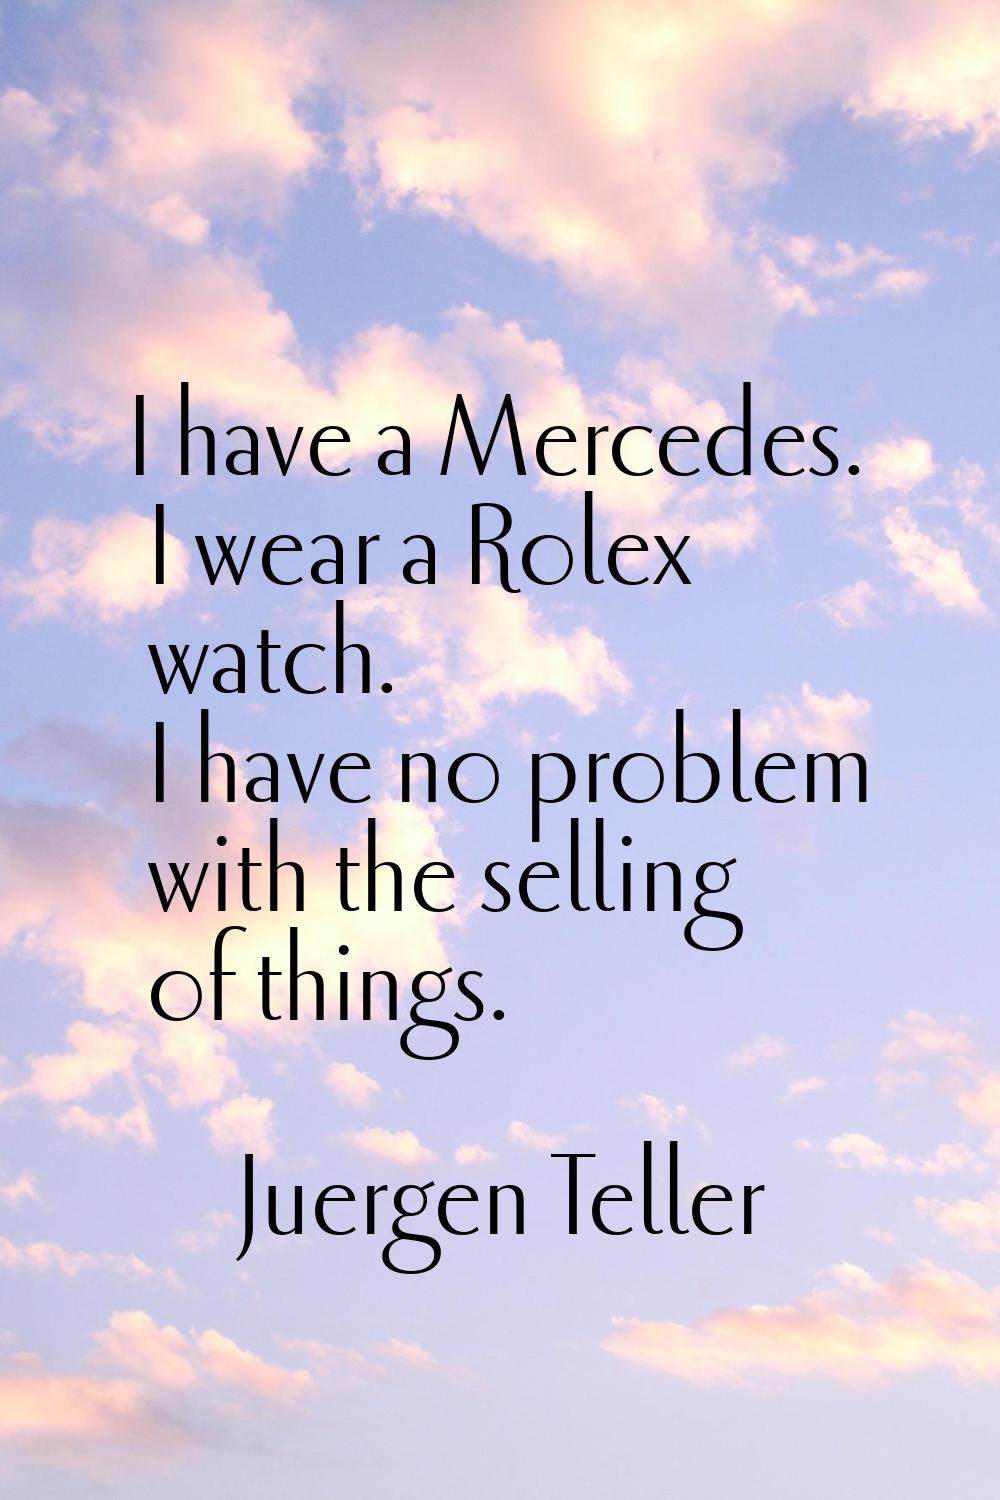 I have a Mercedes. I wear a Rolex watch. I have no problem with the selling of things.